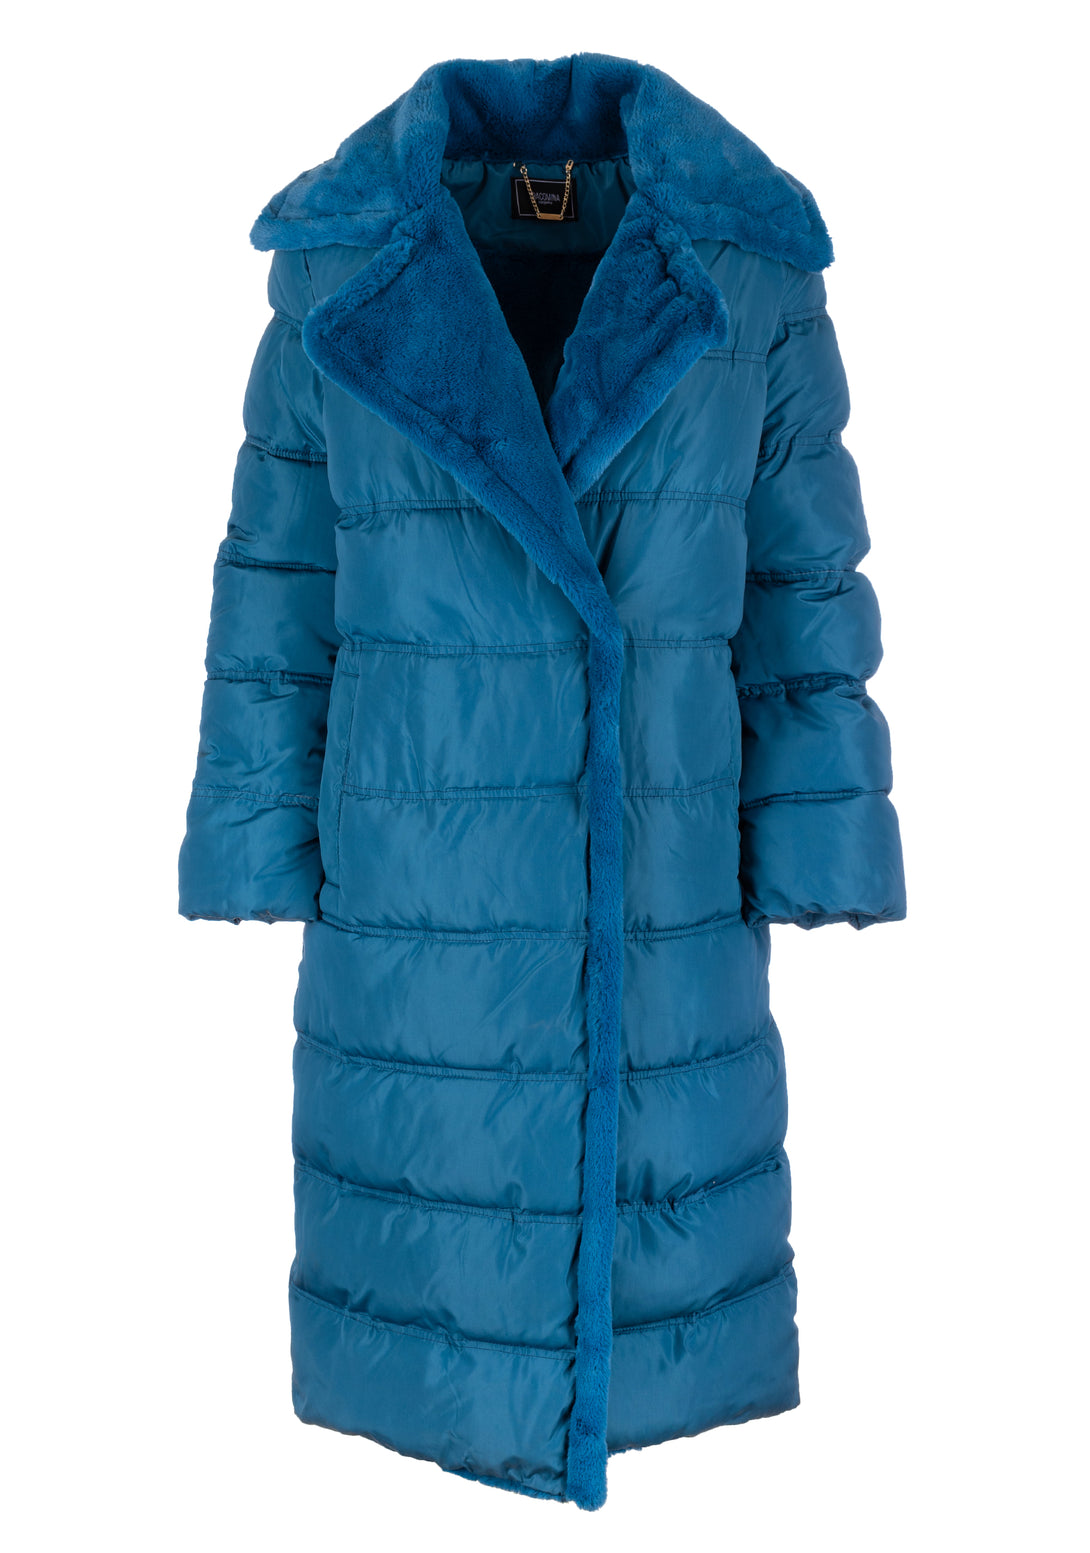 Long padded jacket double breasted with internal part made in eco fur